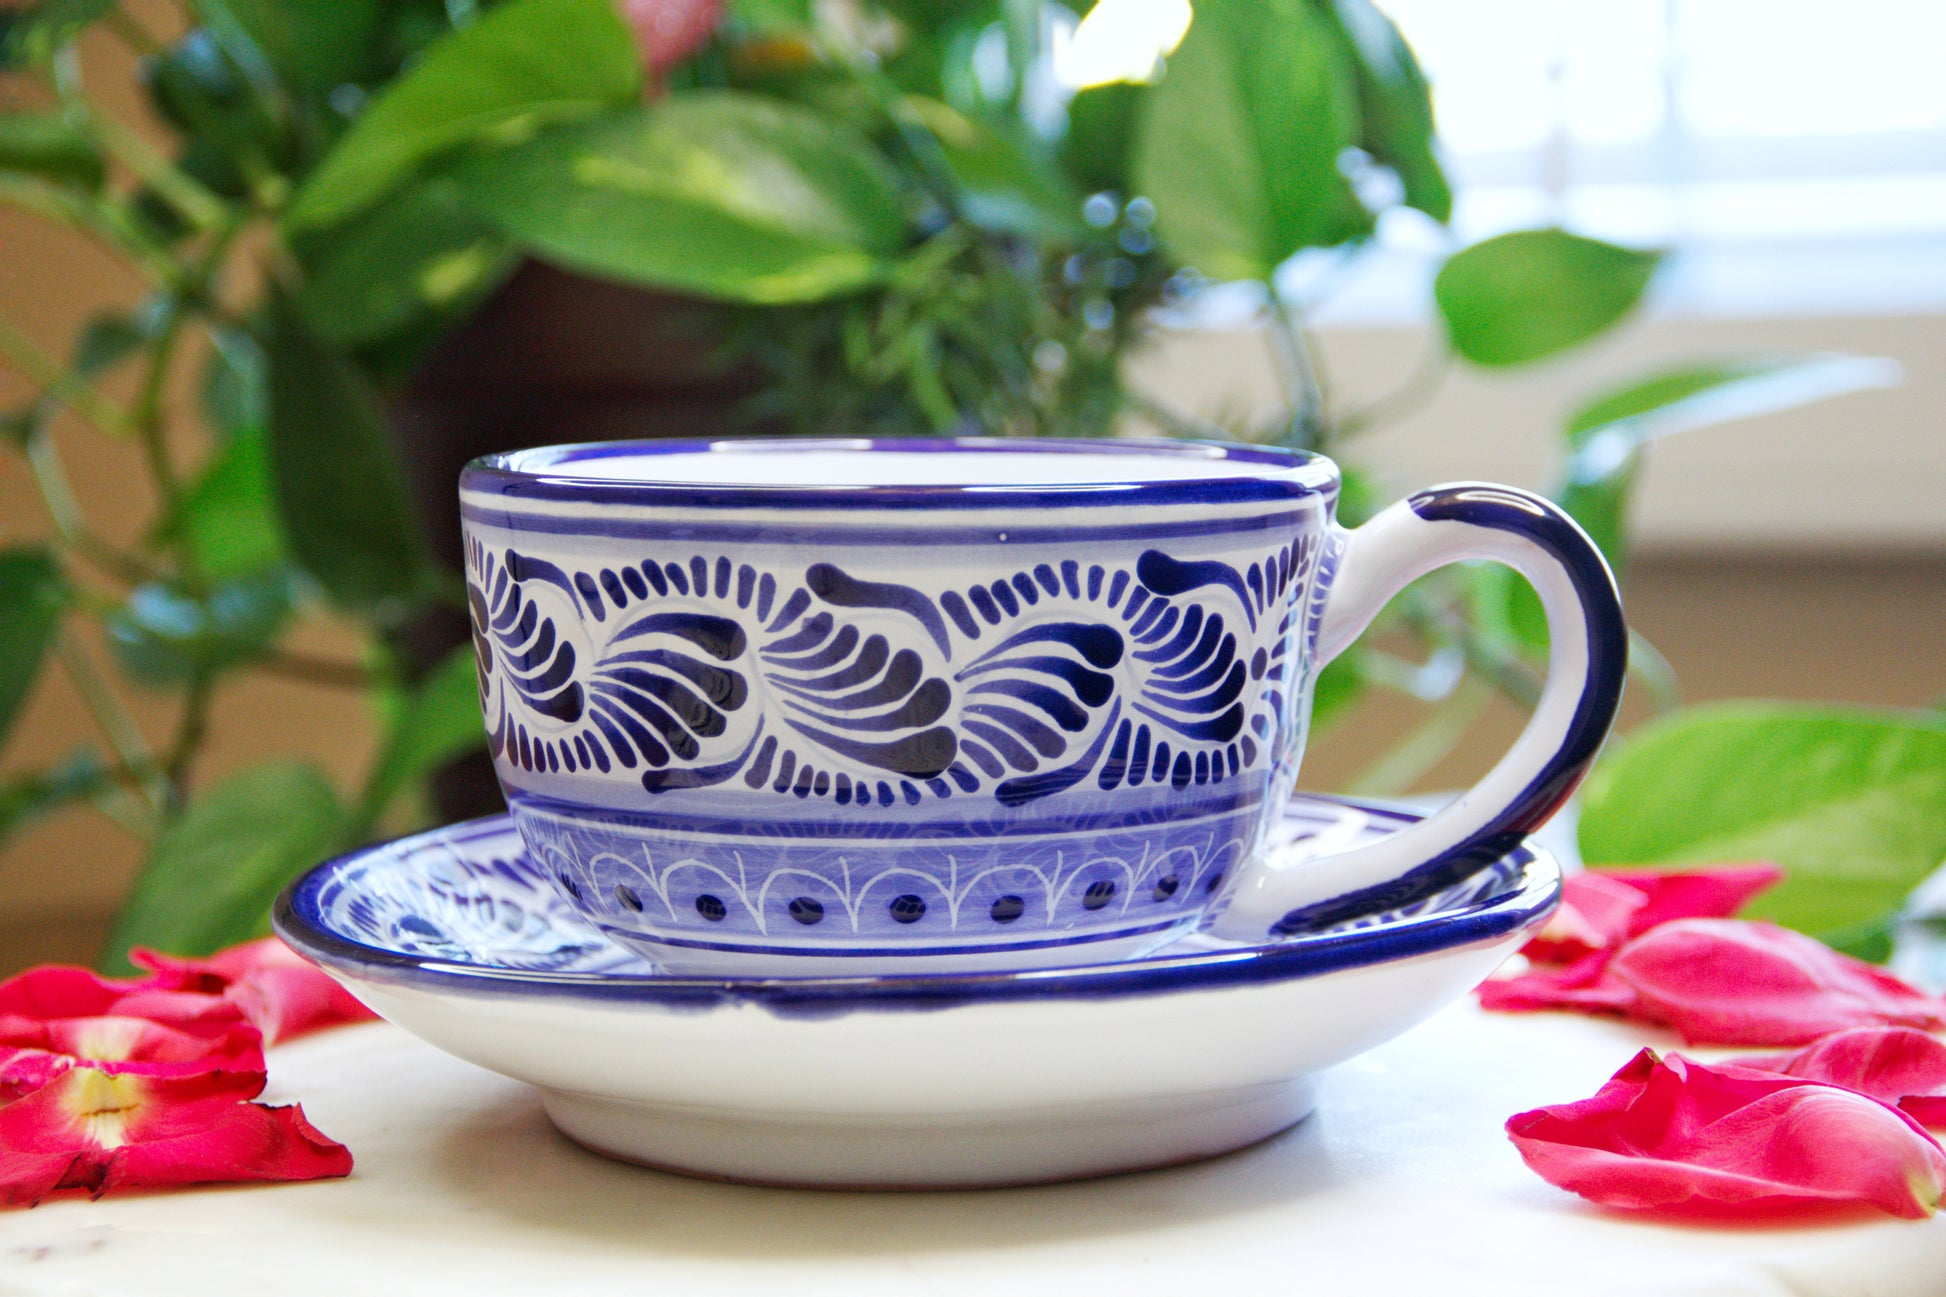 Artisanal candle in a beautiful blue and white hand designed talavera cup and plate with the cup placed on the plate. Handcrafted by Artisan in Puebla, Mexico. 100% All Natural Soy Candle. Reuse the talavera as home decor or storage.